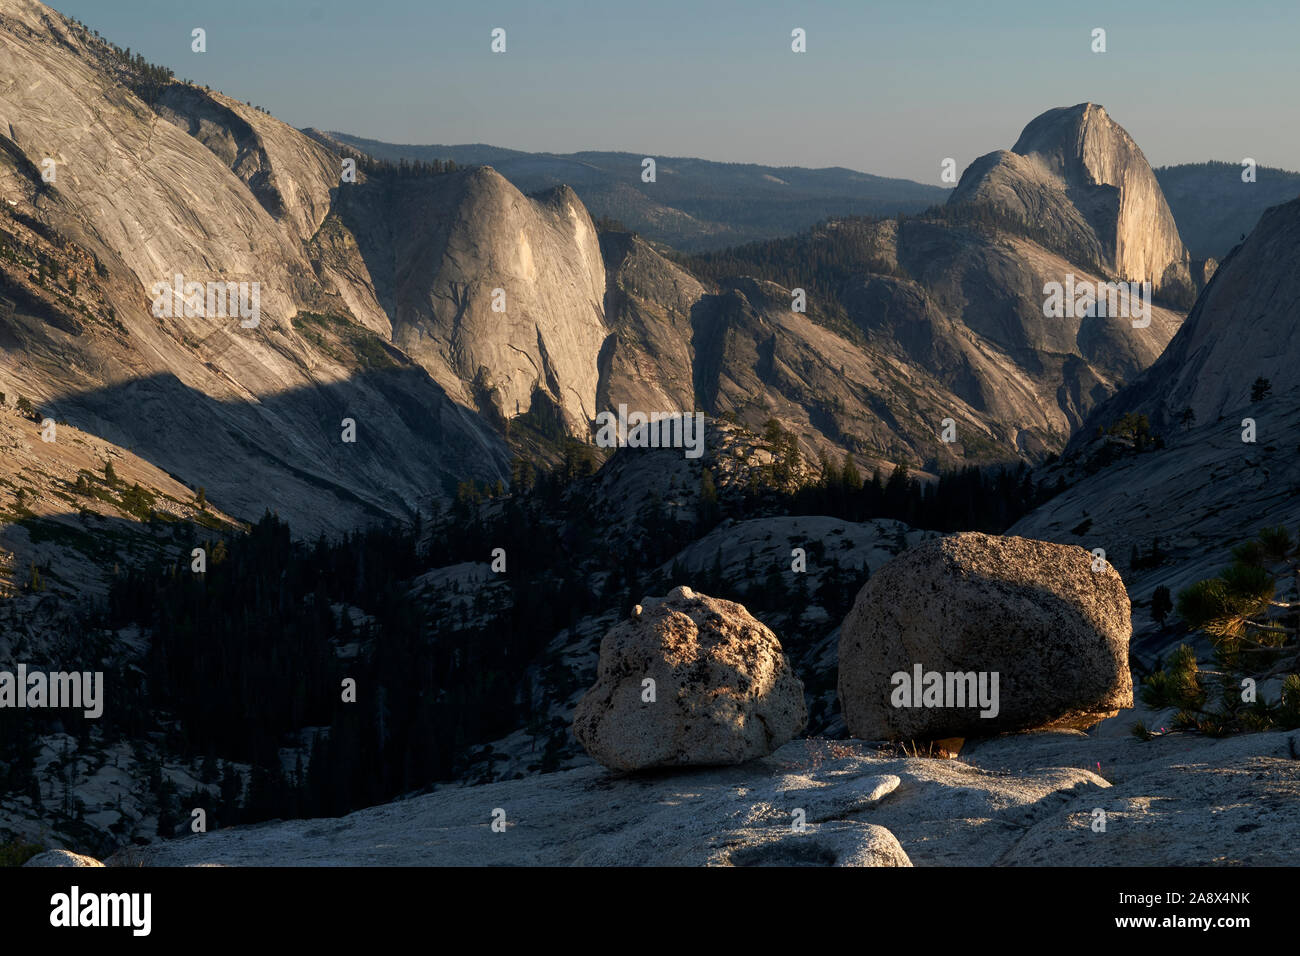 Half-dome from Olmstead Point in Yosemite National Park, California, USA Stock Photo